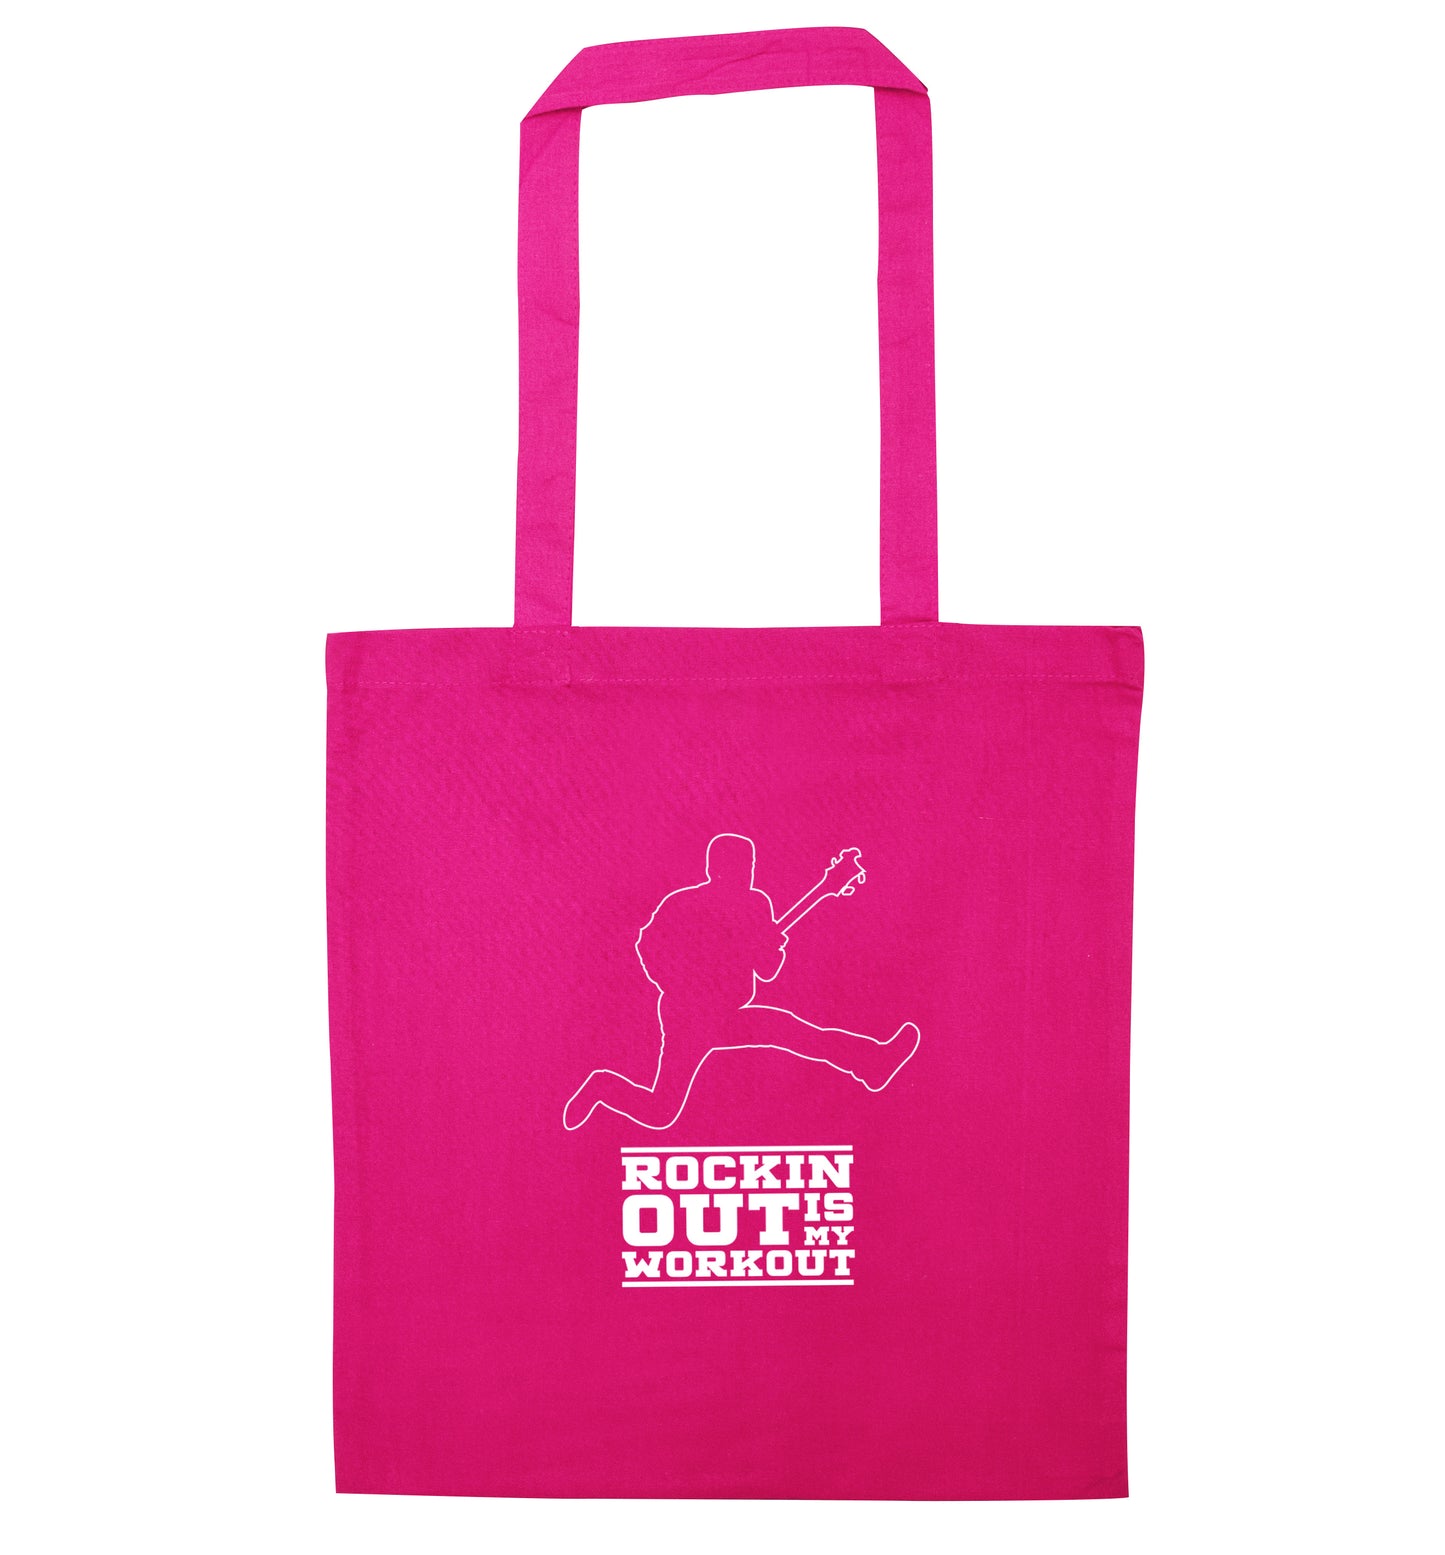 Rockin out is my workout 2 pink tote bag